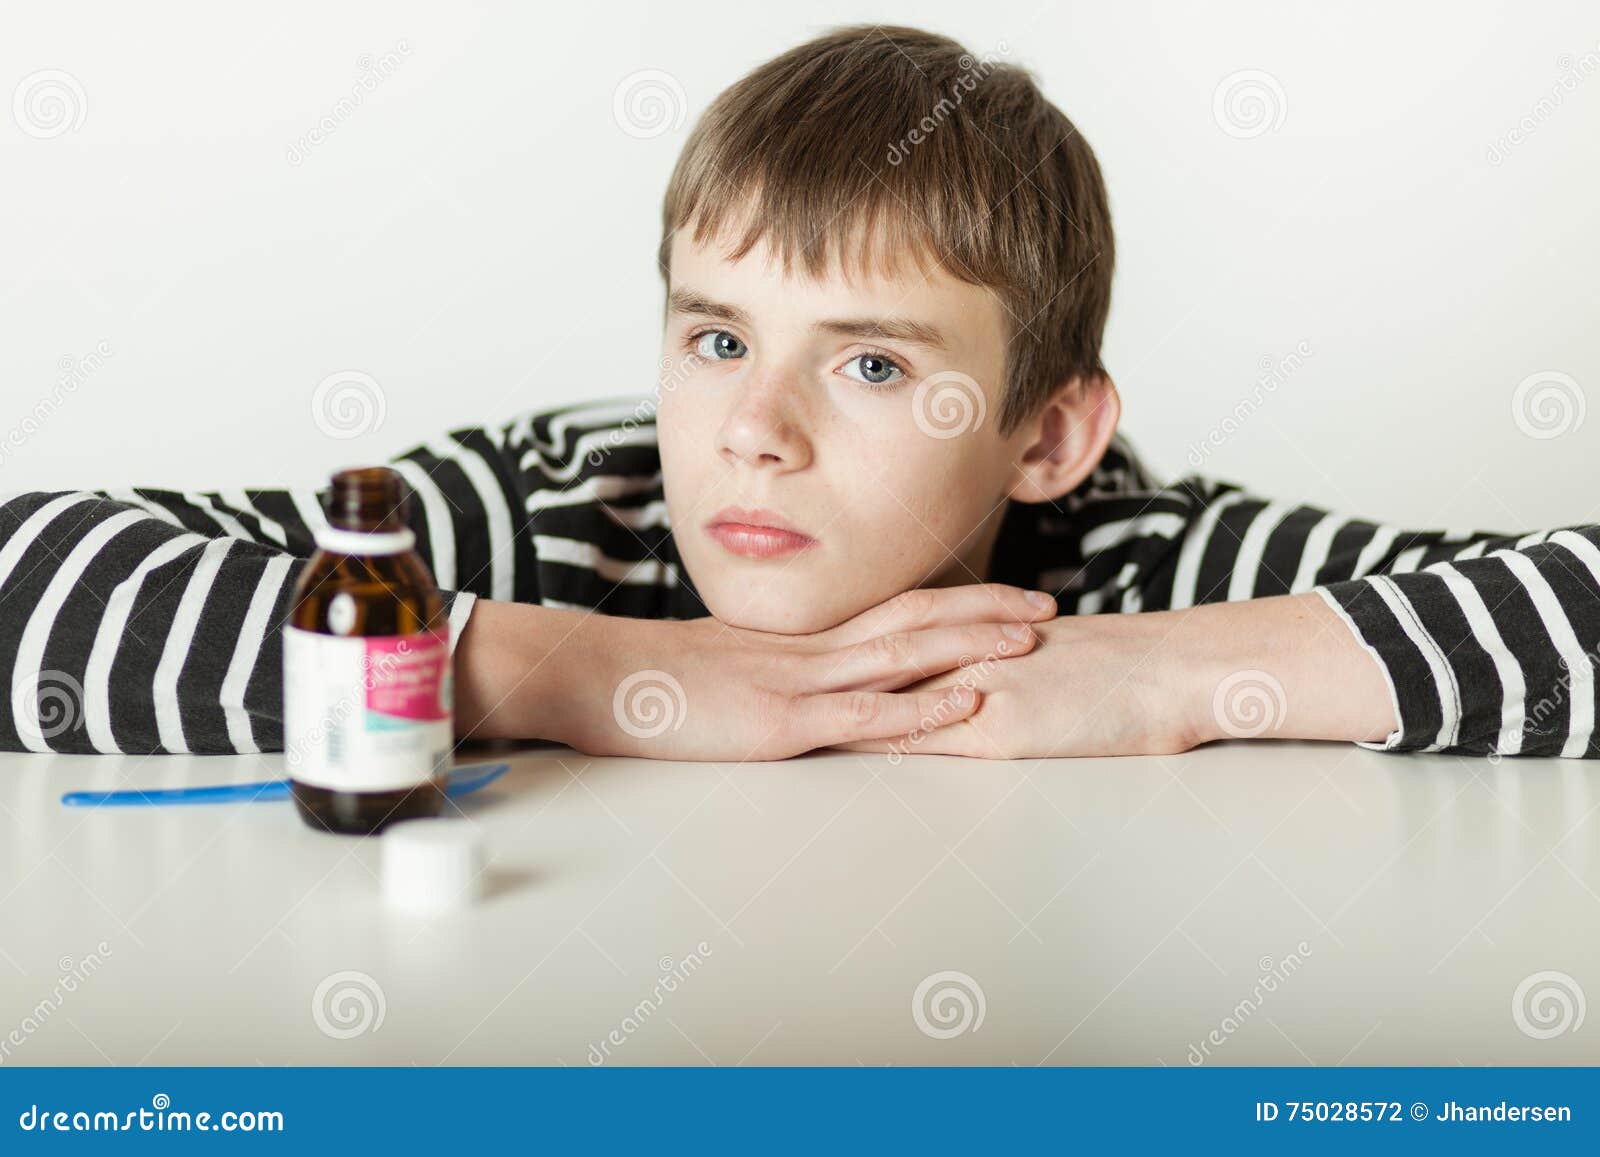 Serious Child With Chin On Arms Near Medicine Stock Photo ...